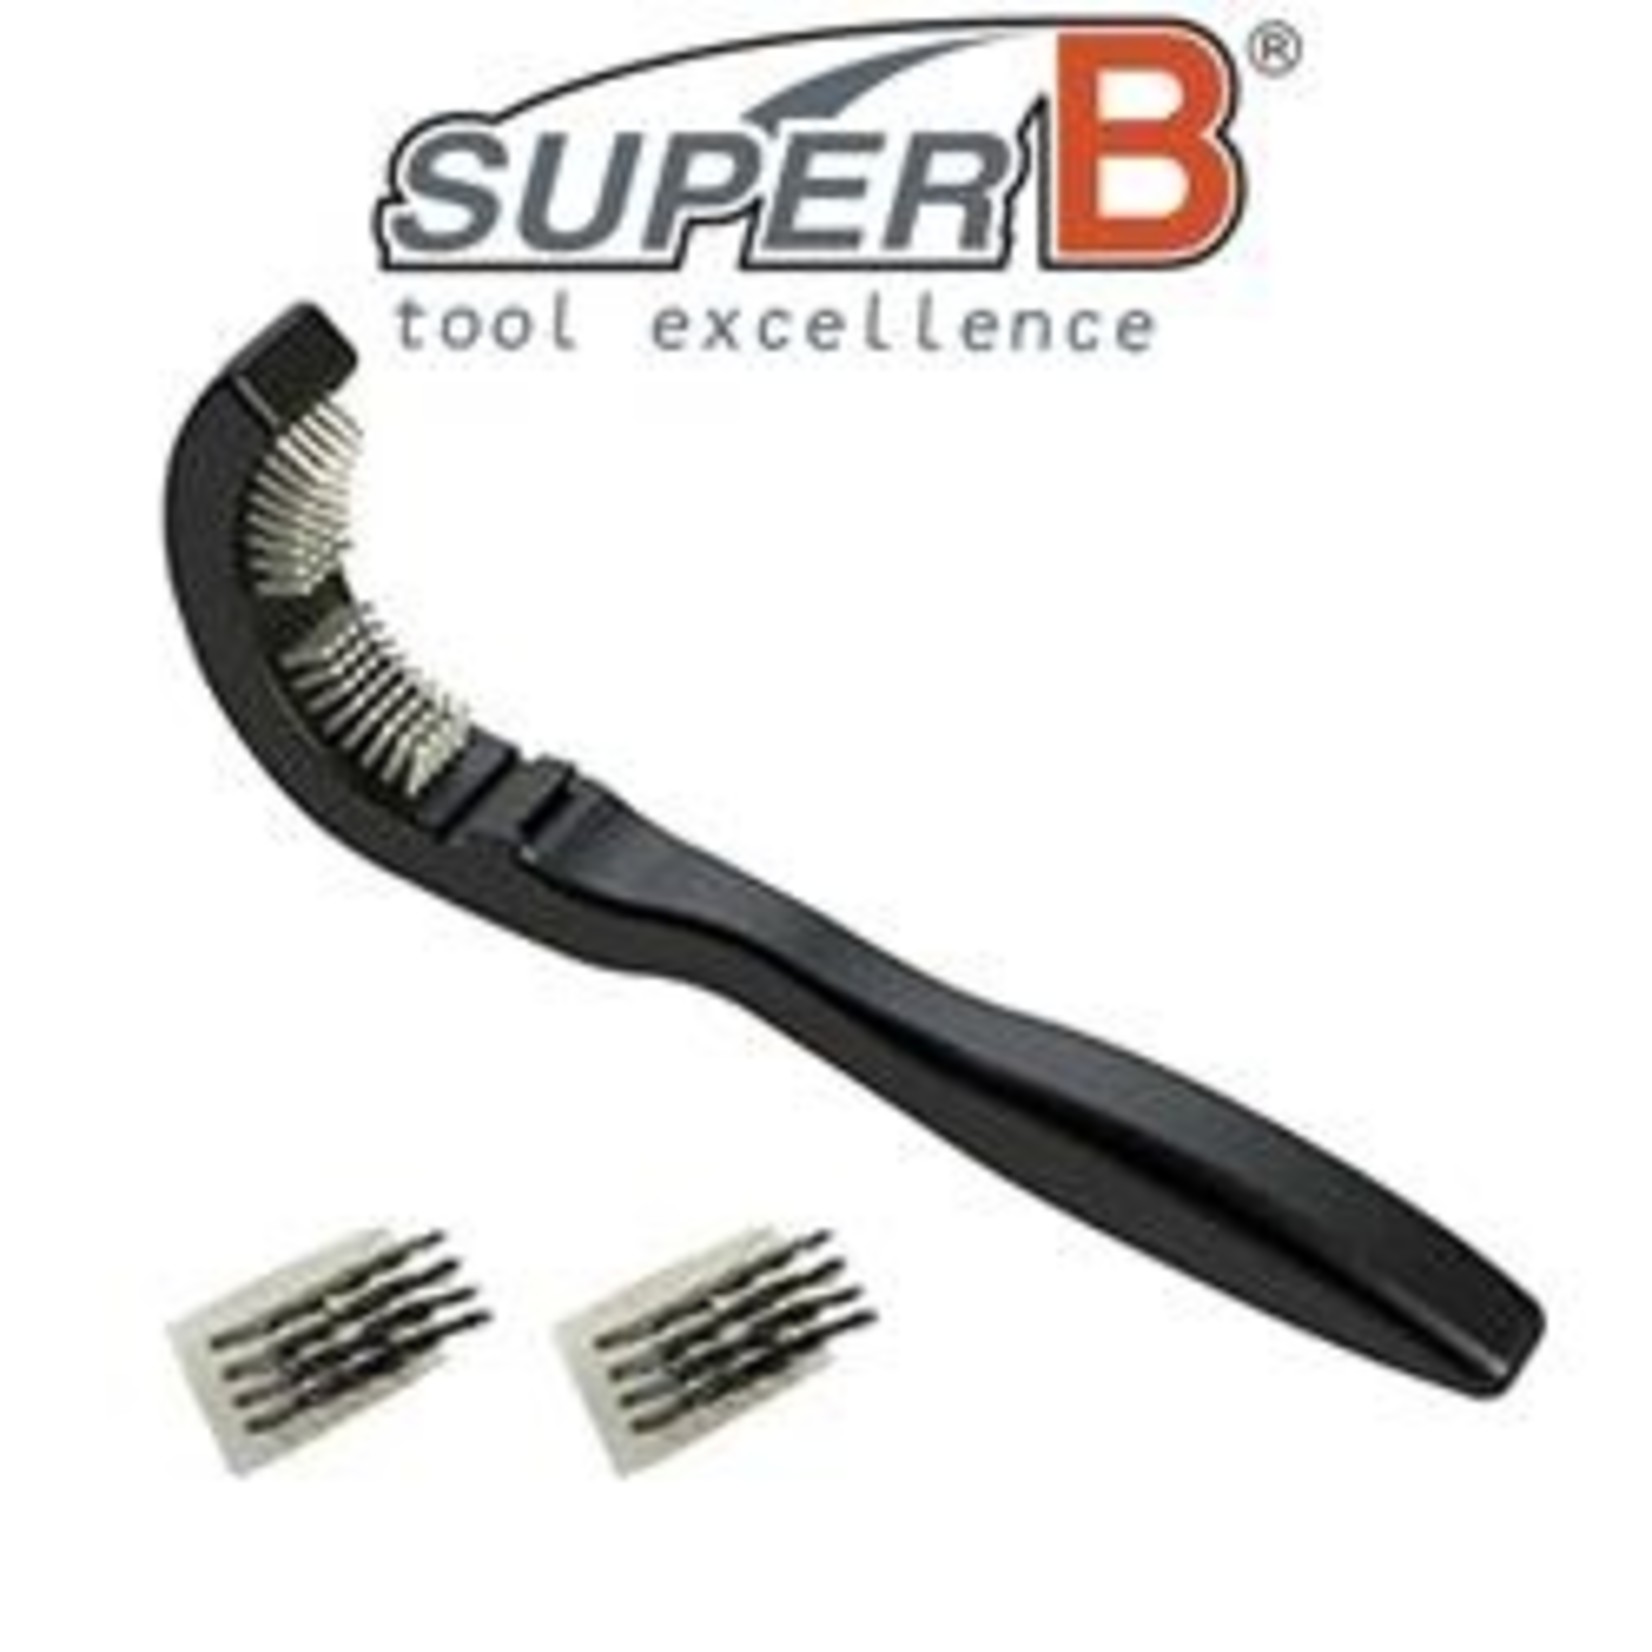 Super B SuperB 2 In 1 Brush Multi-Purpose Different Parts of Bicycle Cleaning-Bike Tool